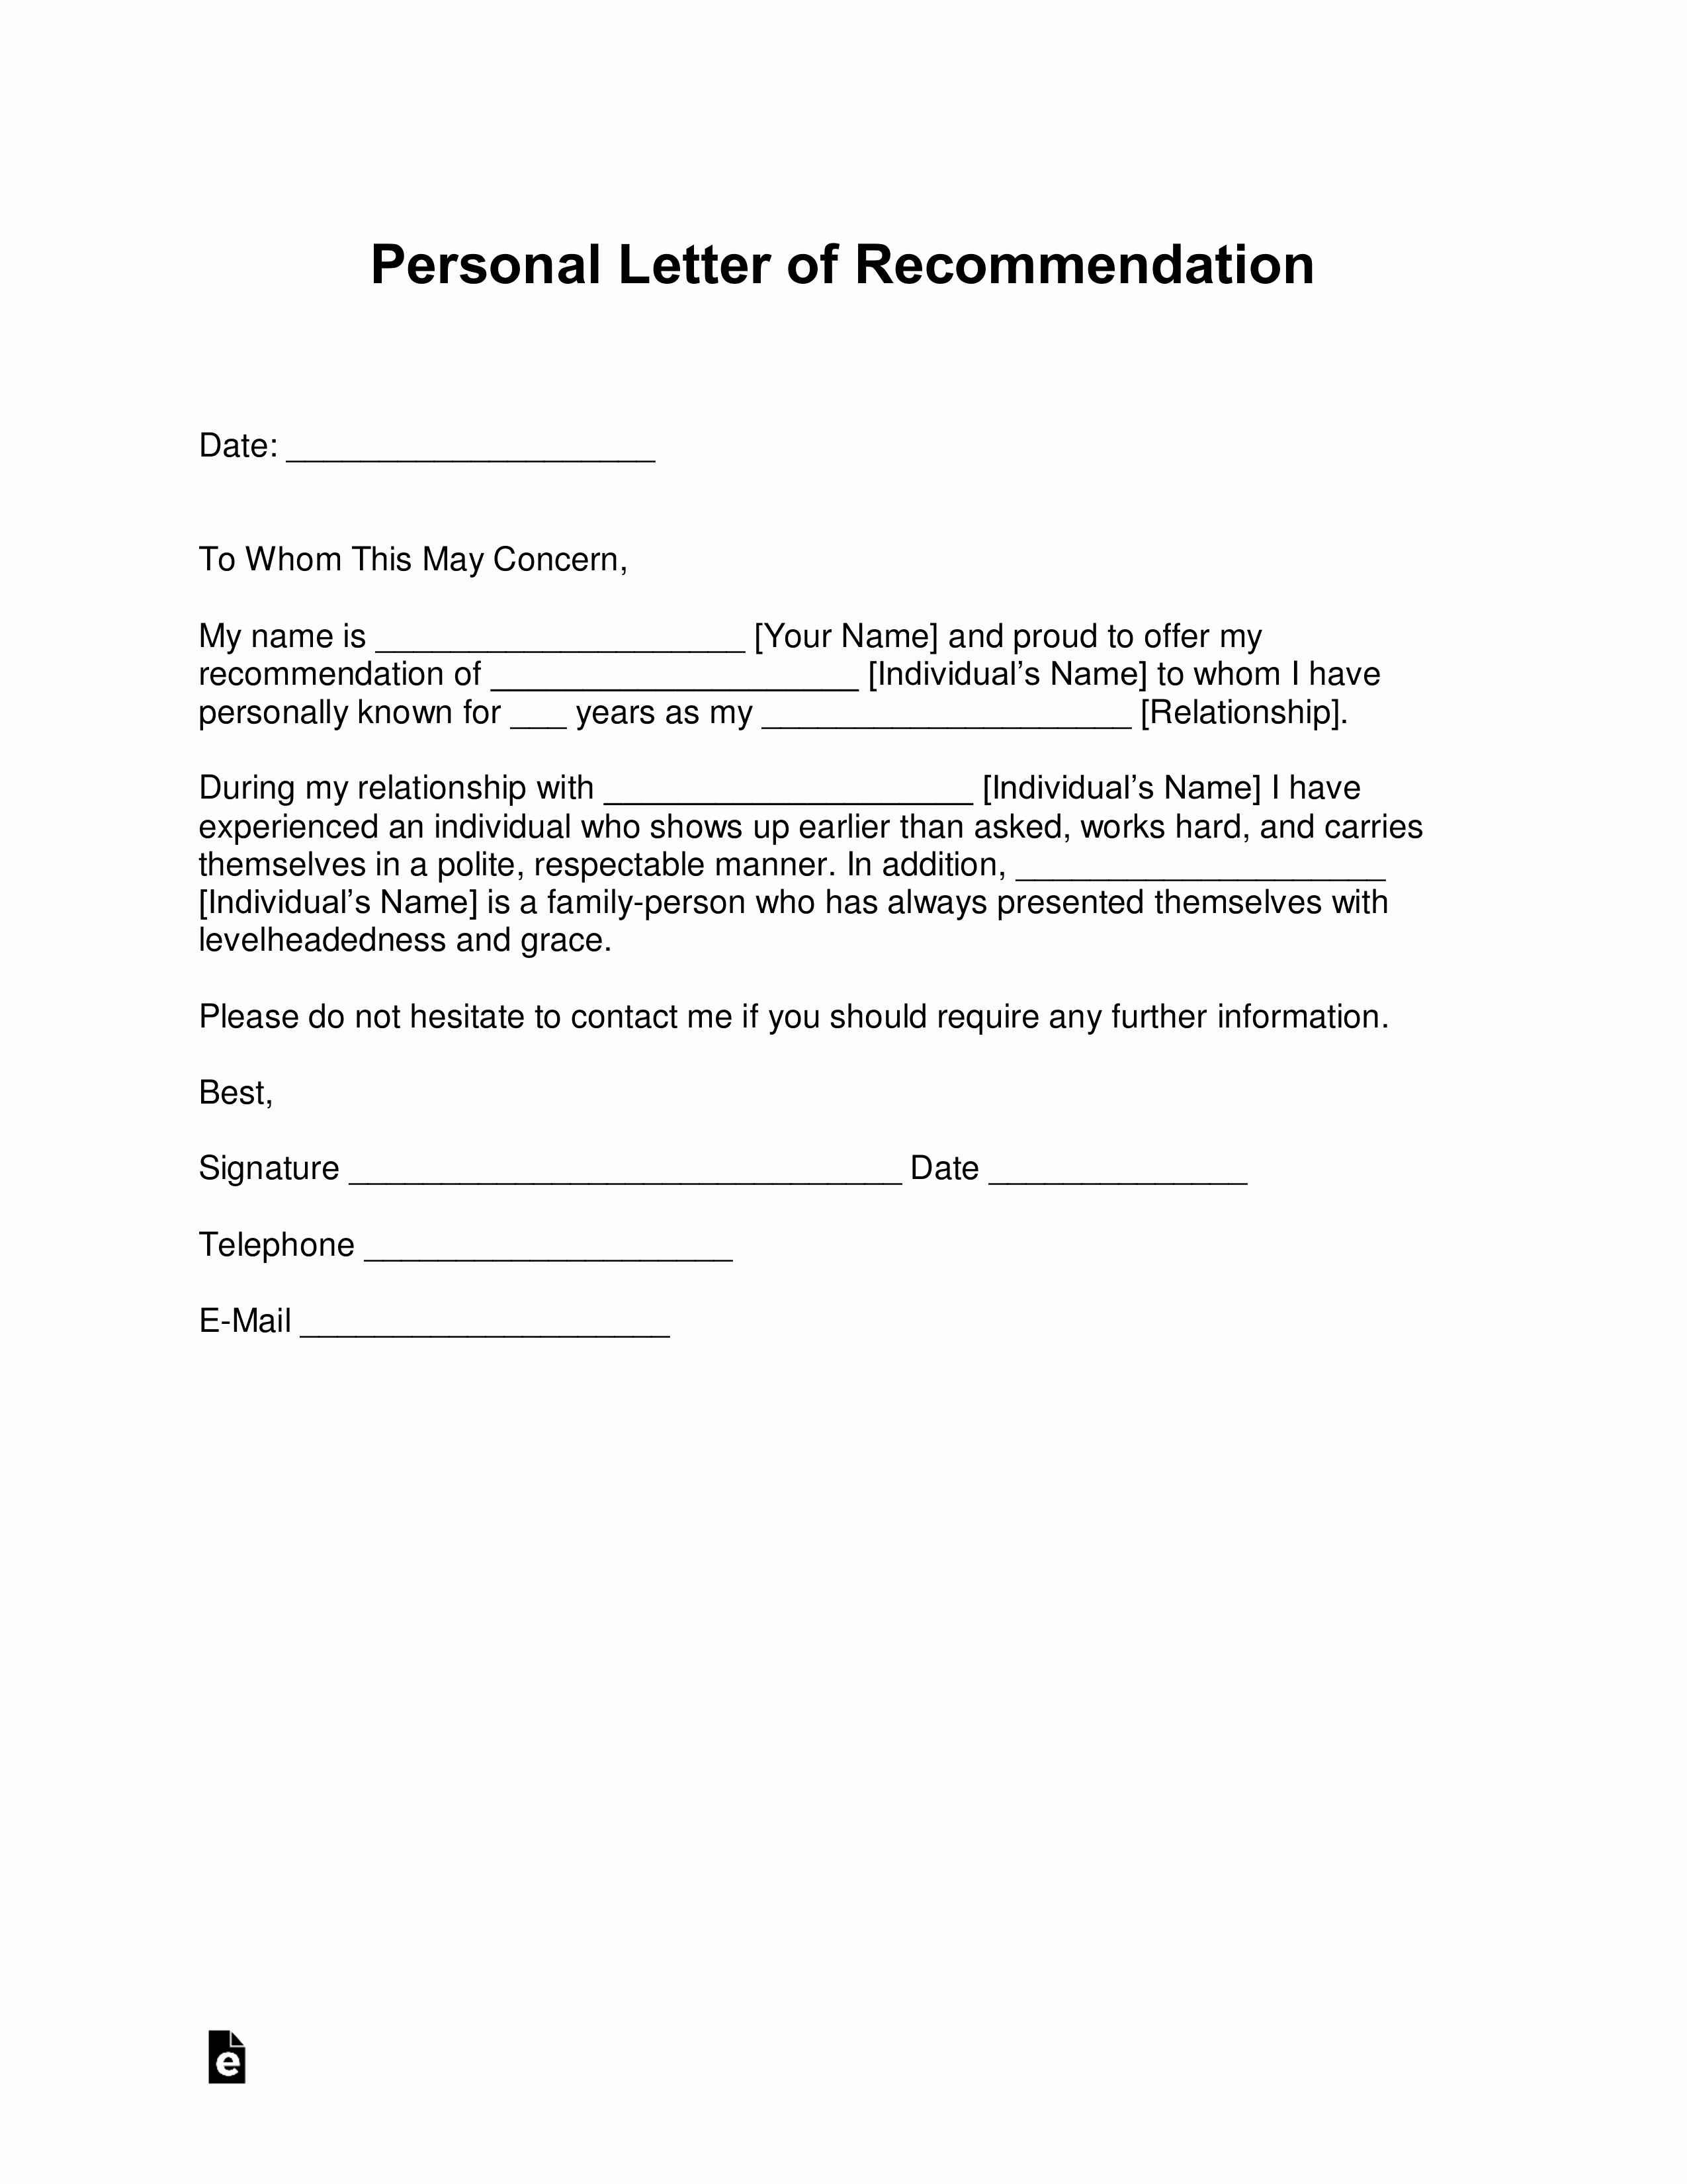 Personal Letter Of Recommendation Template Luxury Free Personal Letter Of Re Mendation Template for A